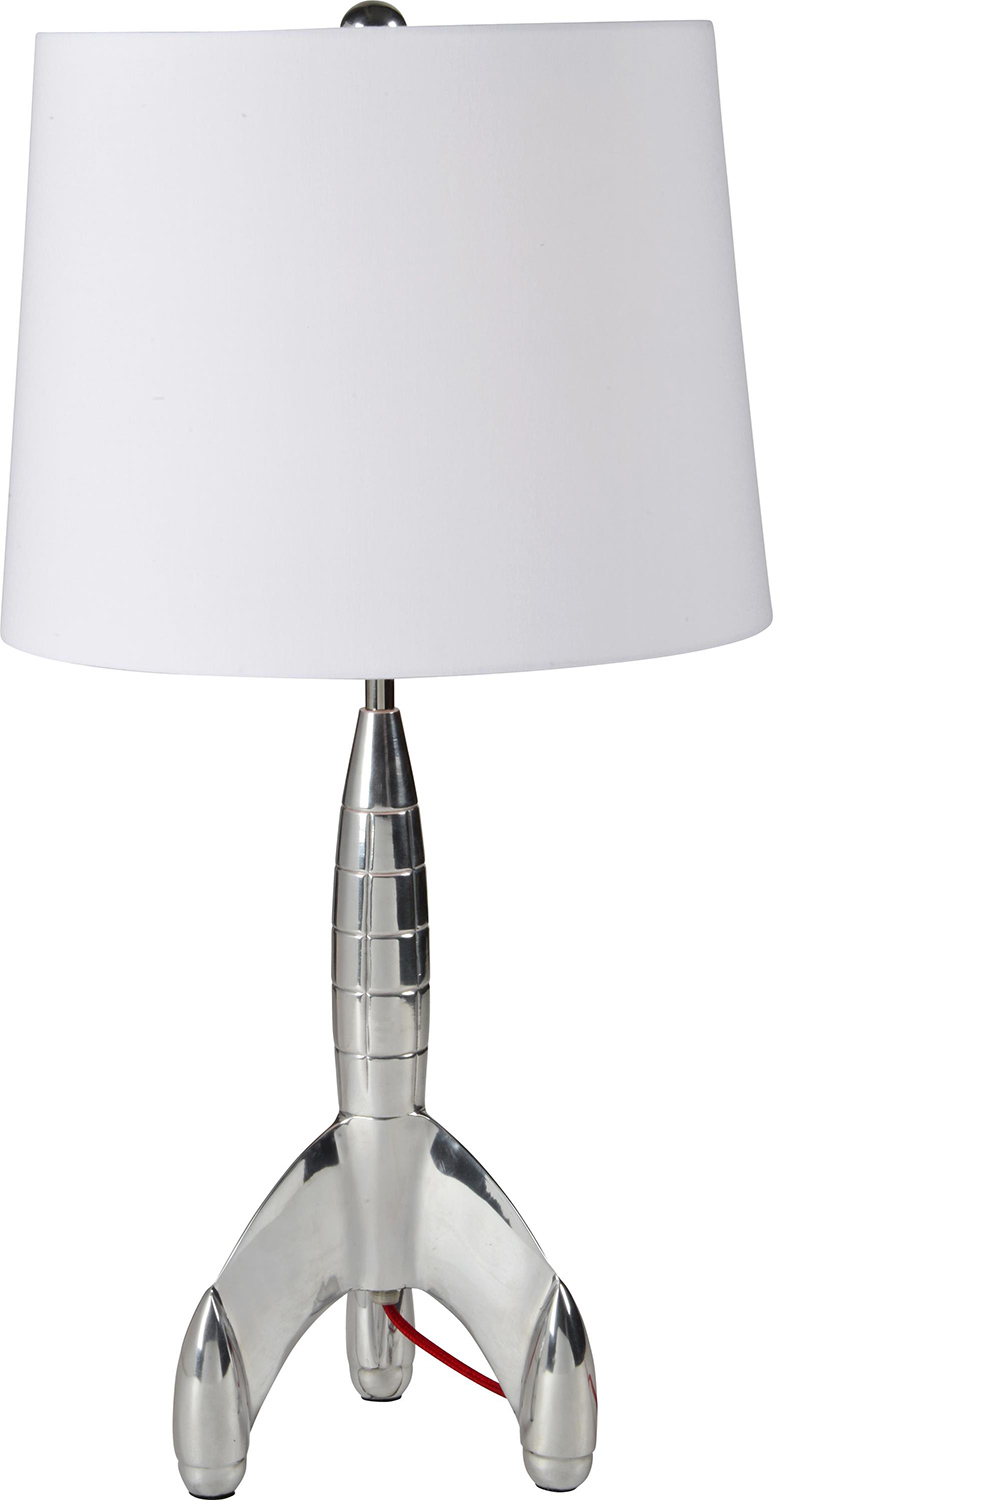 Ren-Wil Jetson Table Lamp - Chrome Plated